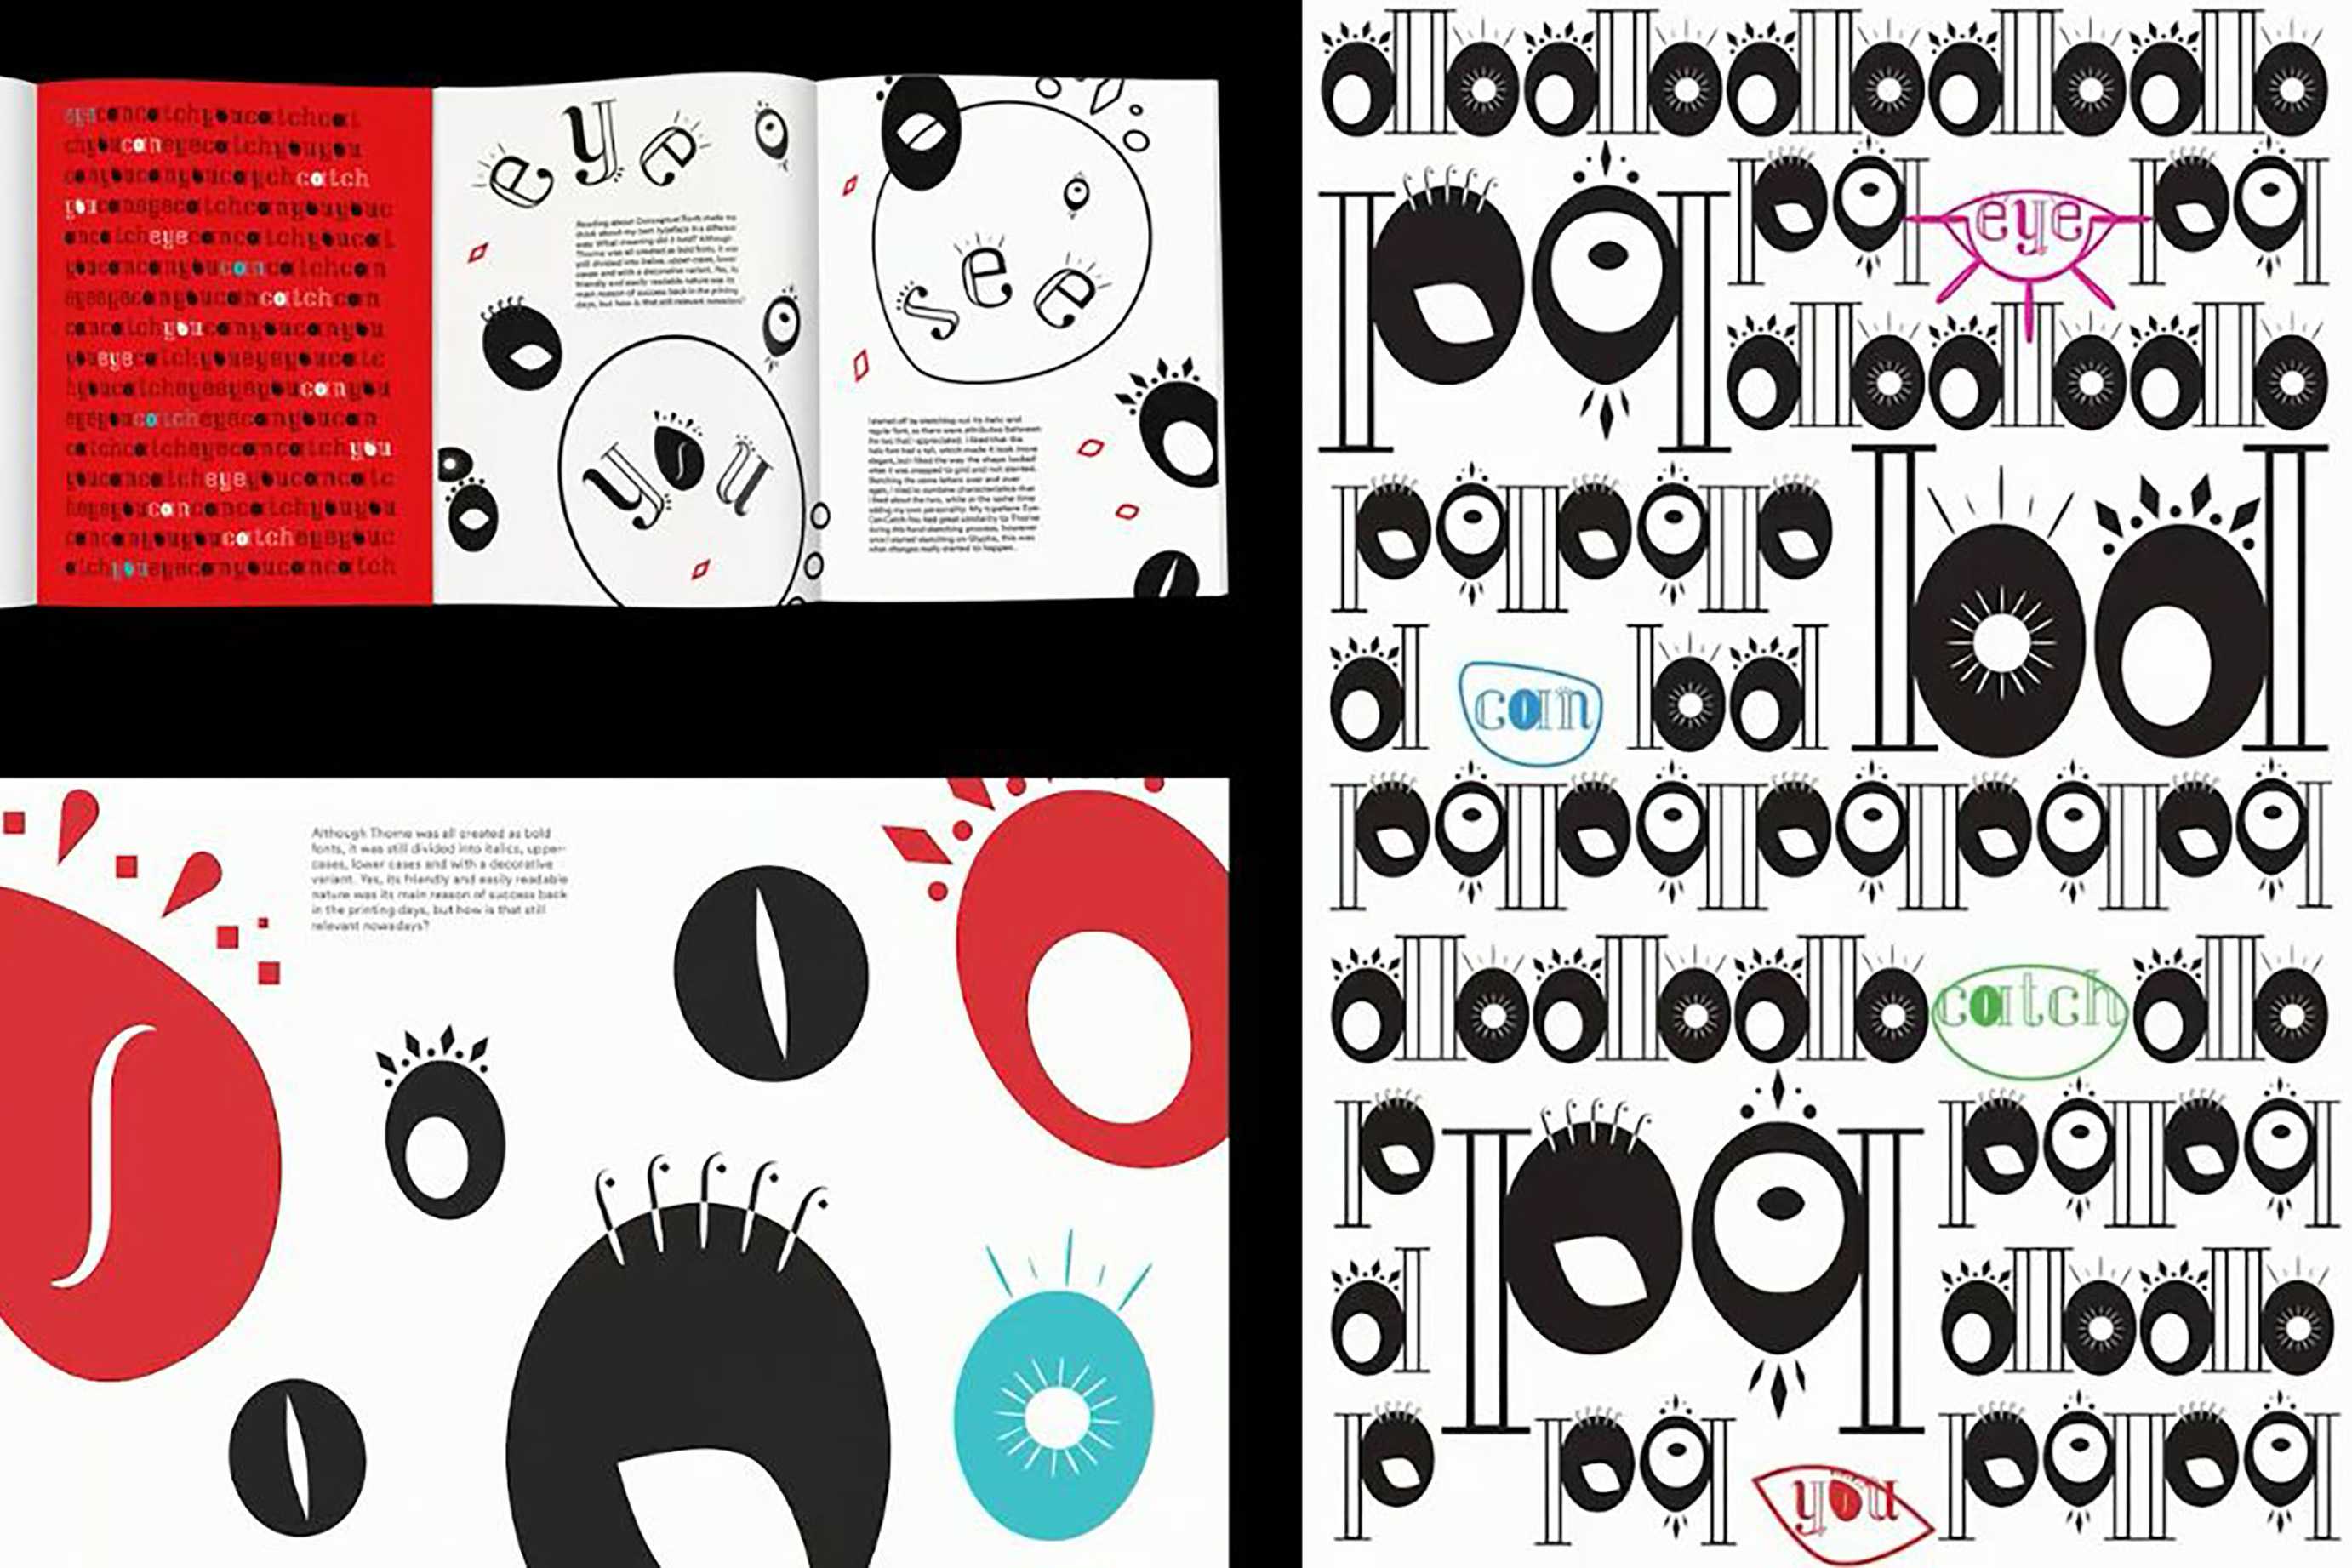 A booklet with typeface inspired by animal eyes